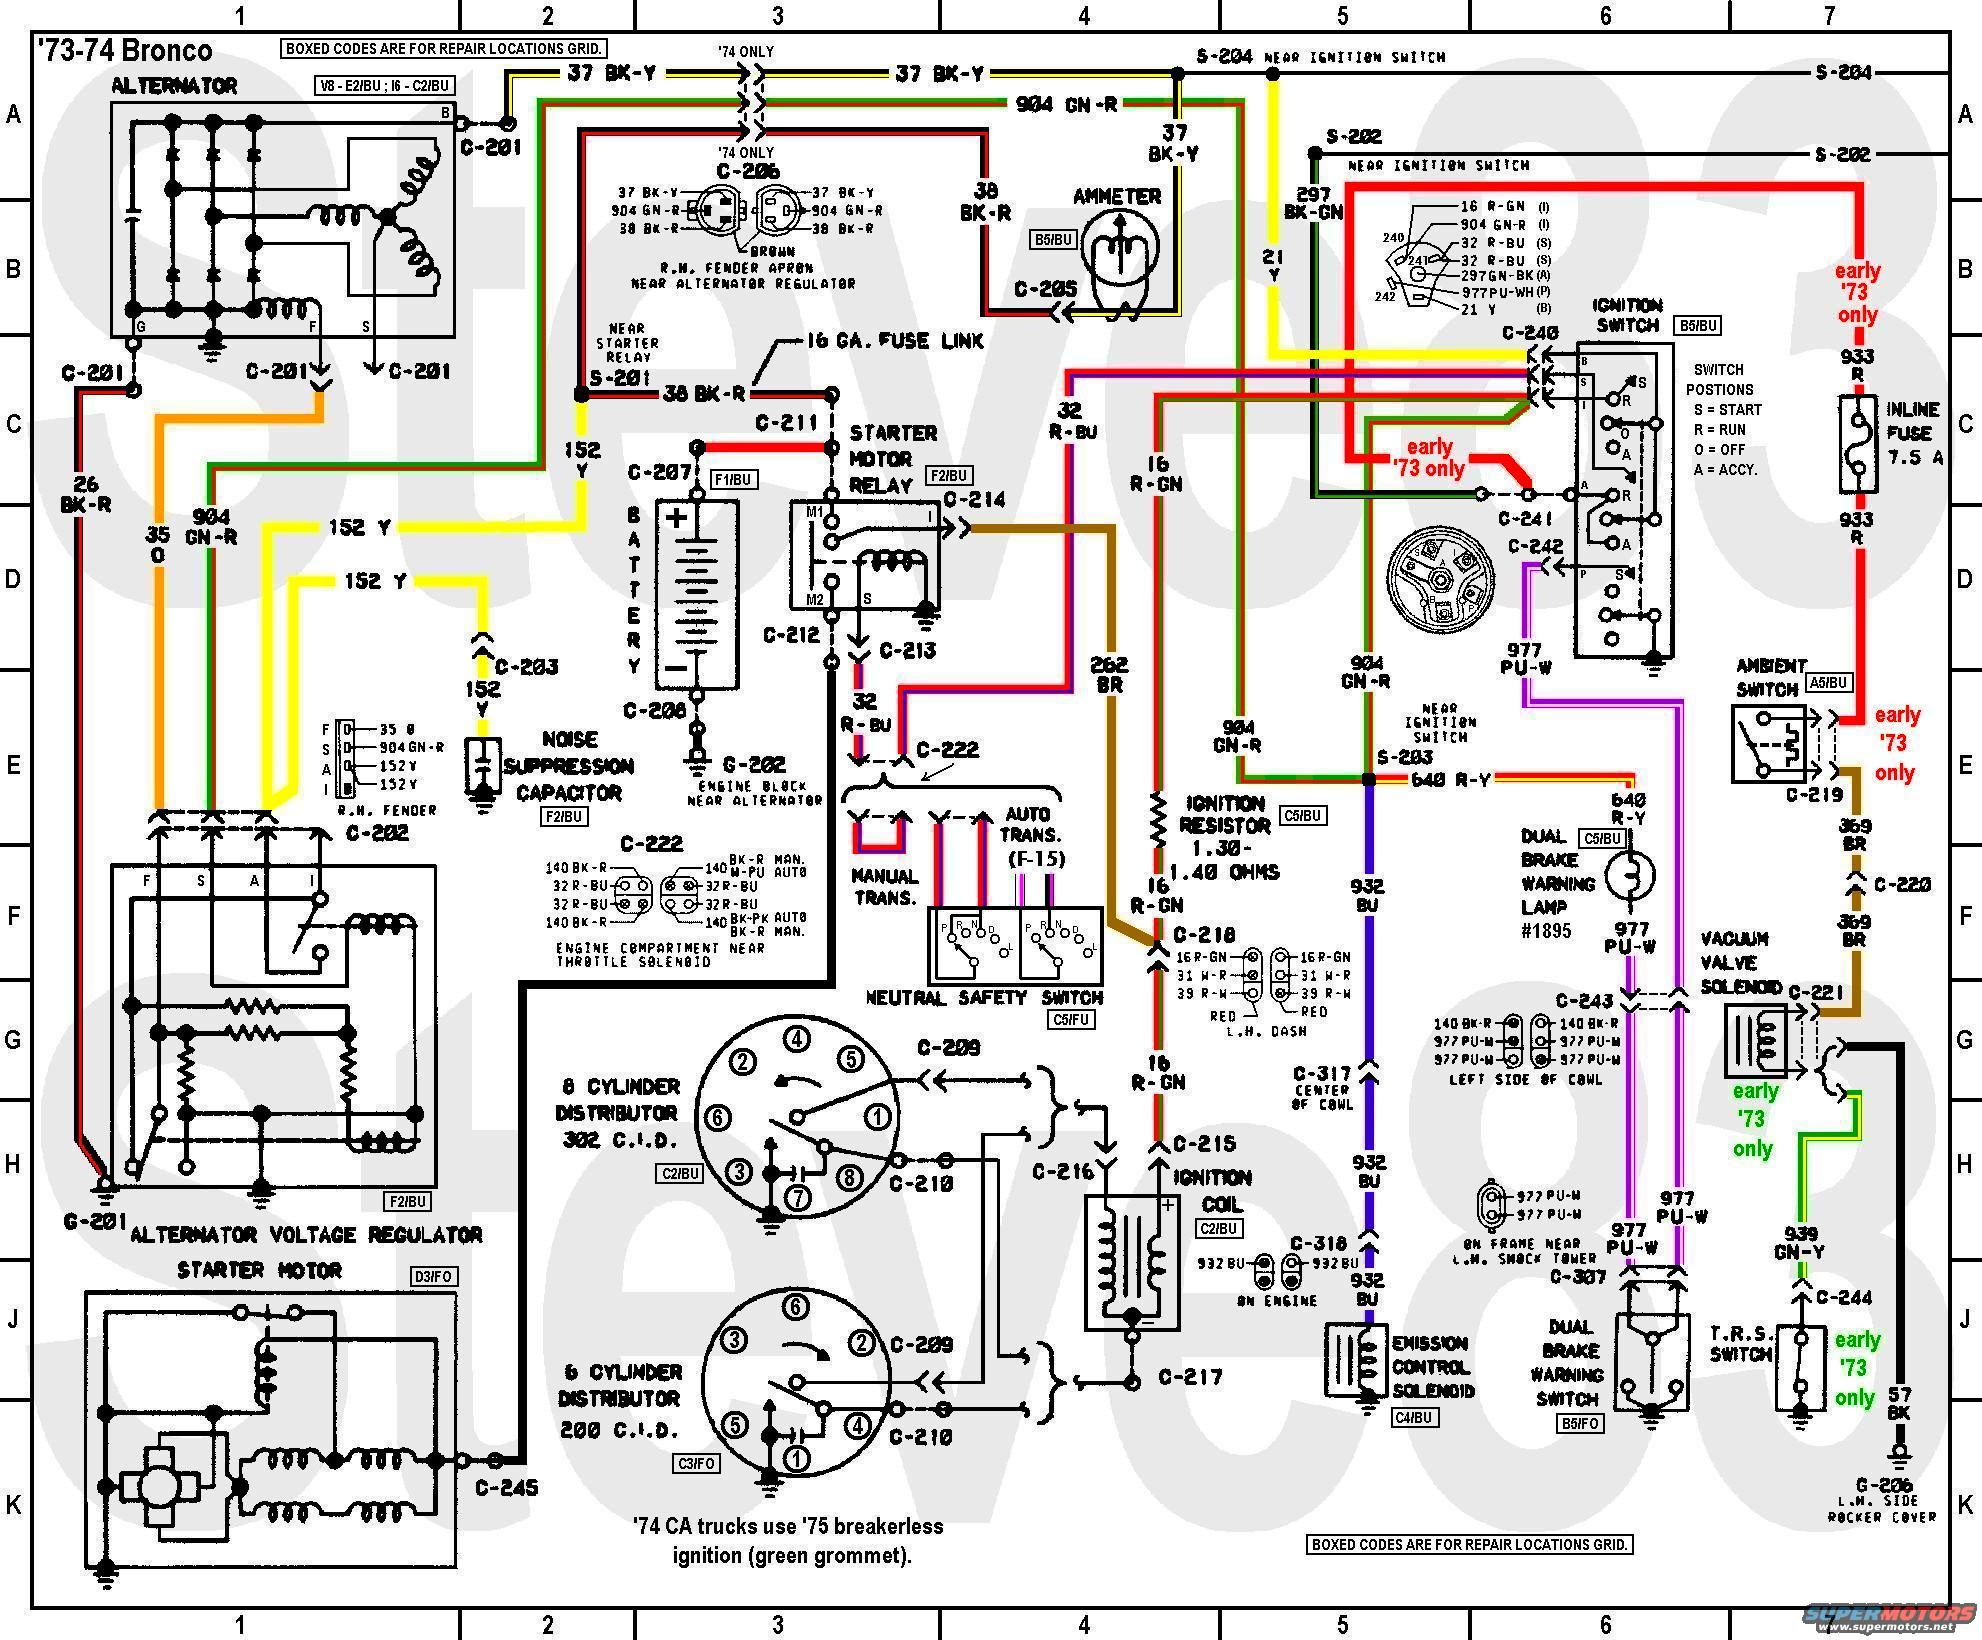 Wiring diagram for 1974 ford bronco #4